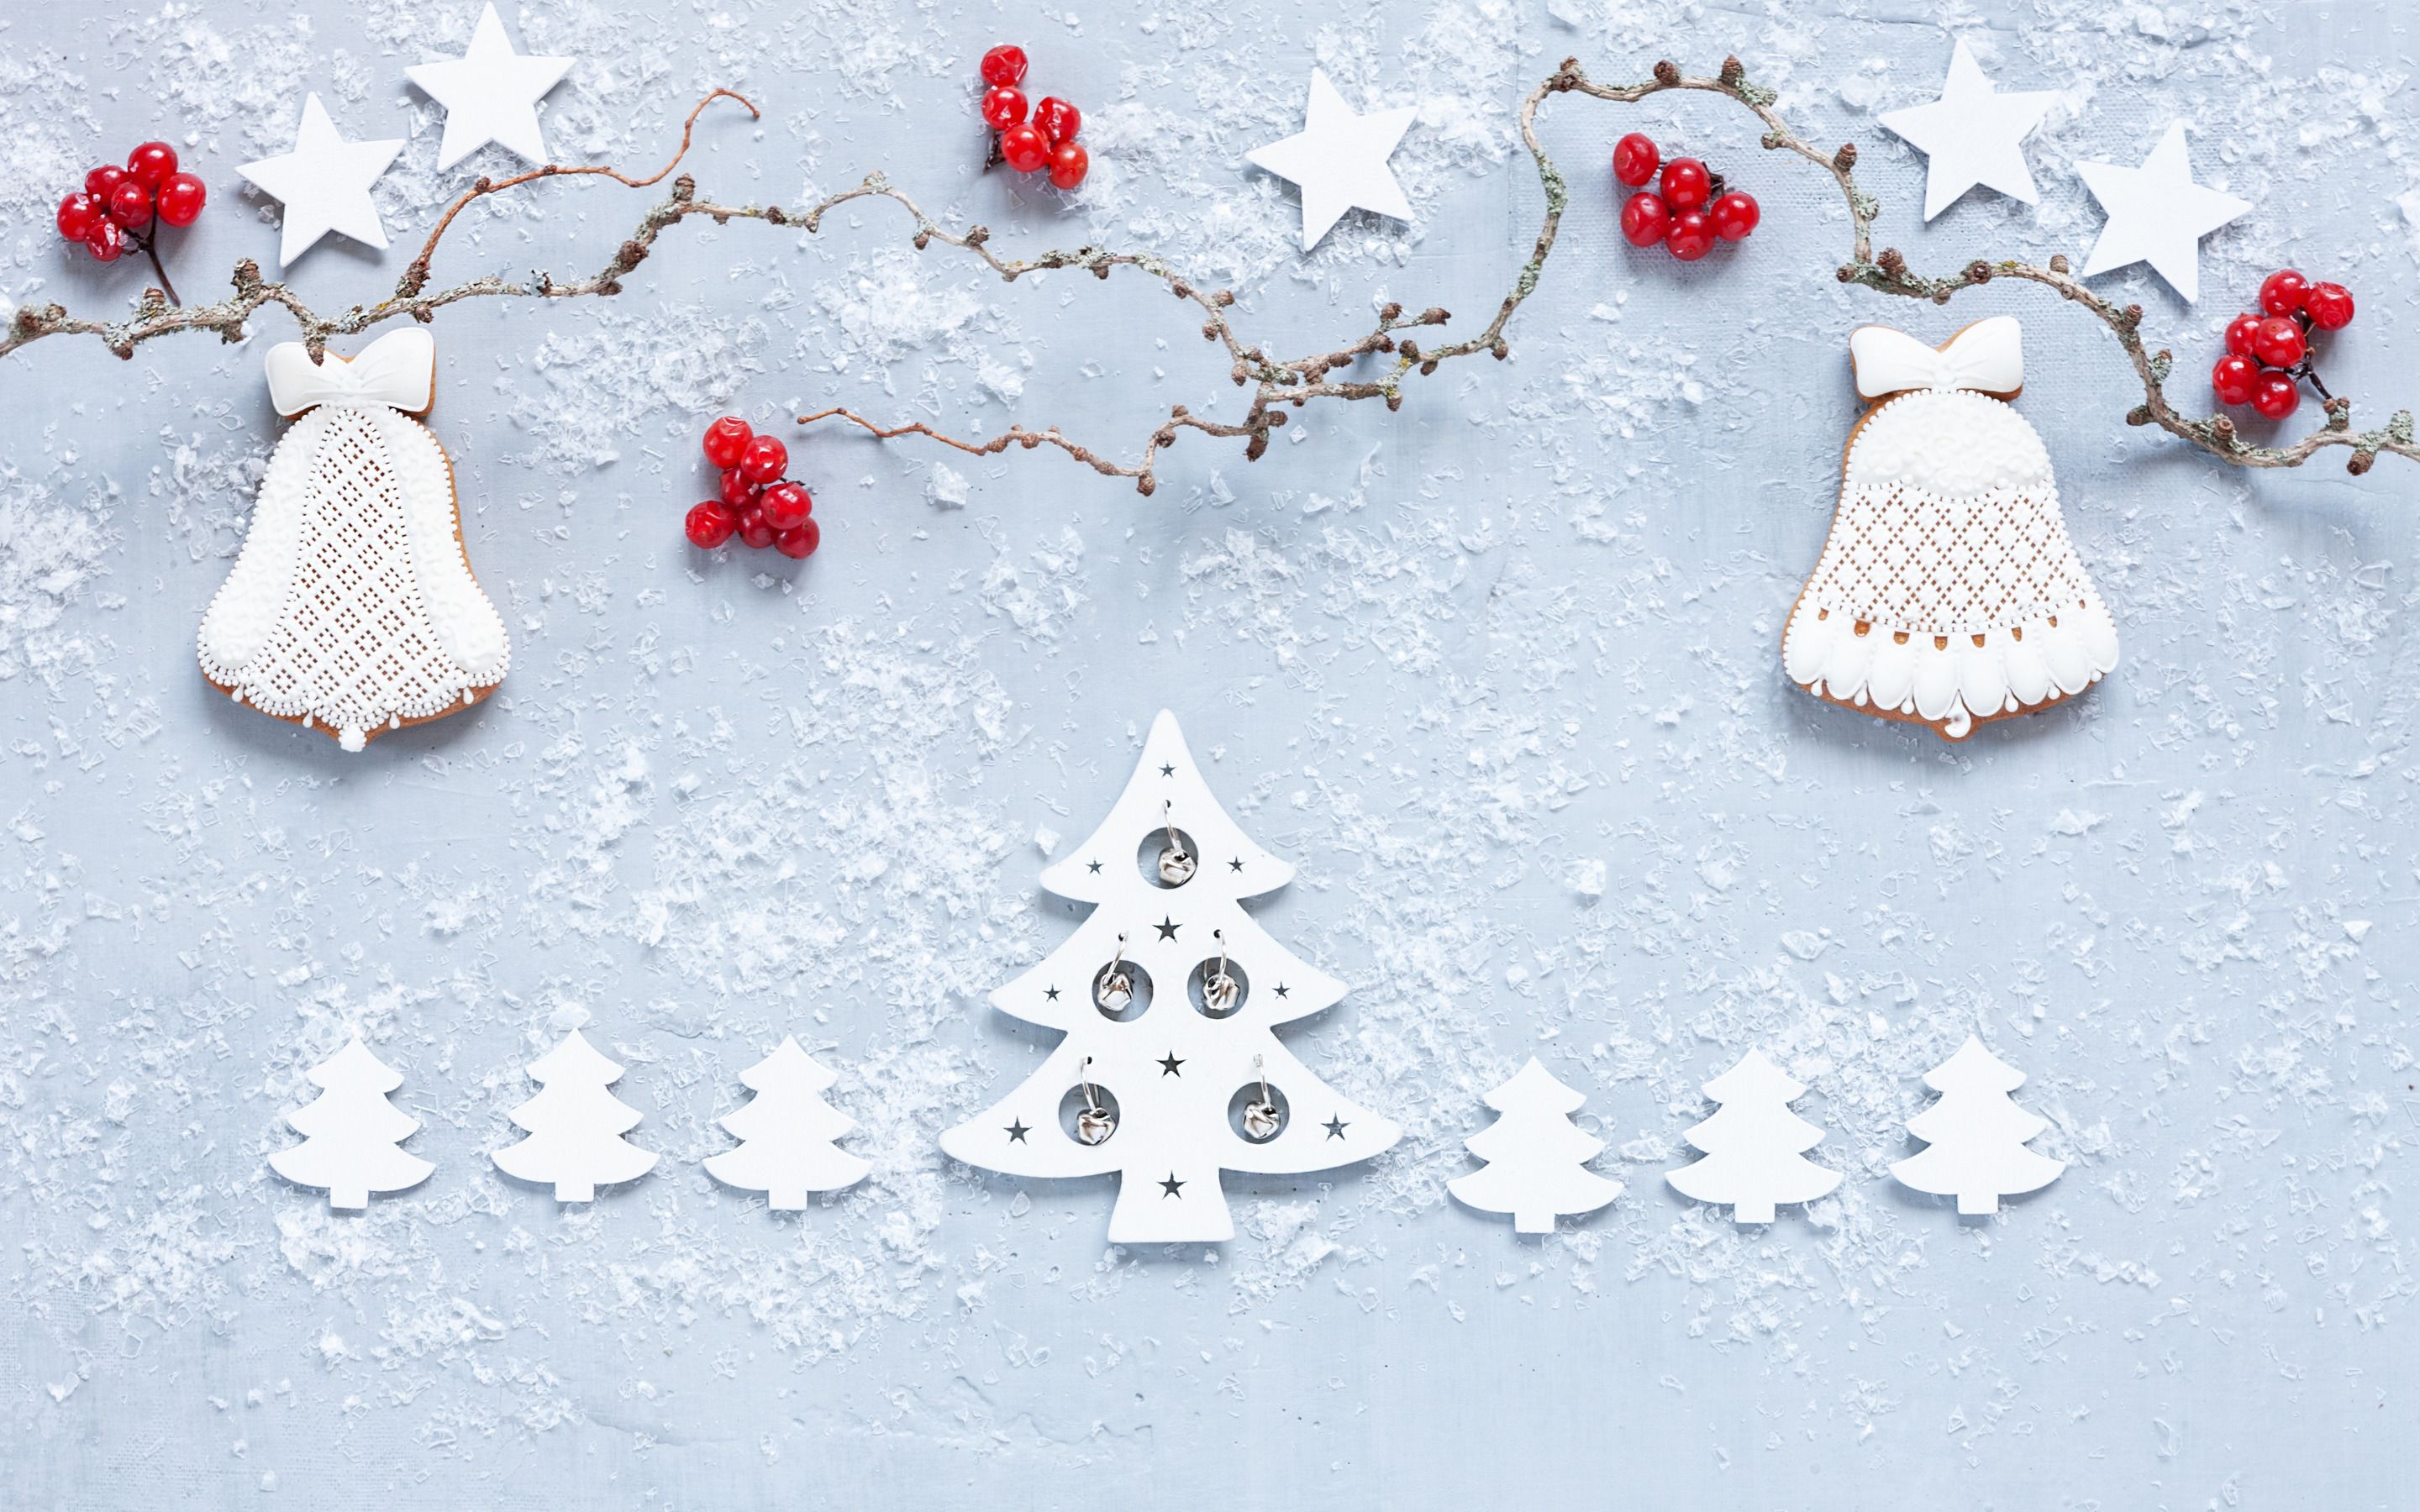 Download wallpaper Winter christmas decoration, winter, snow, christmas cookies, Happy New Year, Christmas, White paper christmas tree for desktop with resolution 2880x1800. High Quality HD picture wallpaper